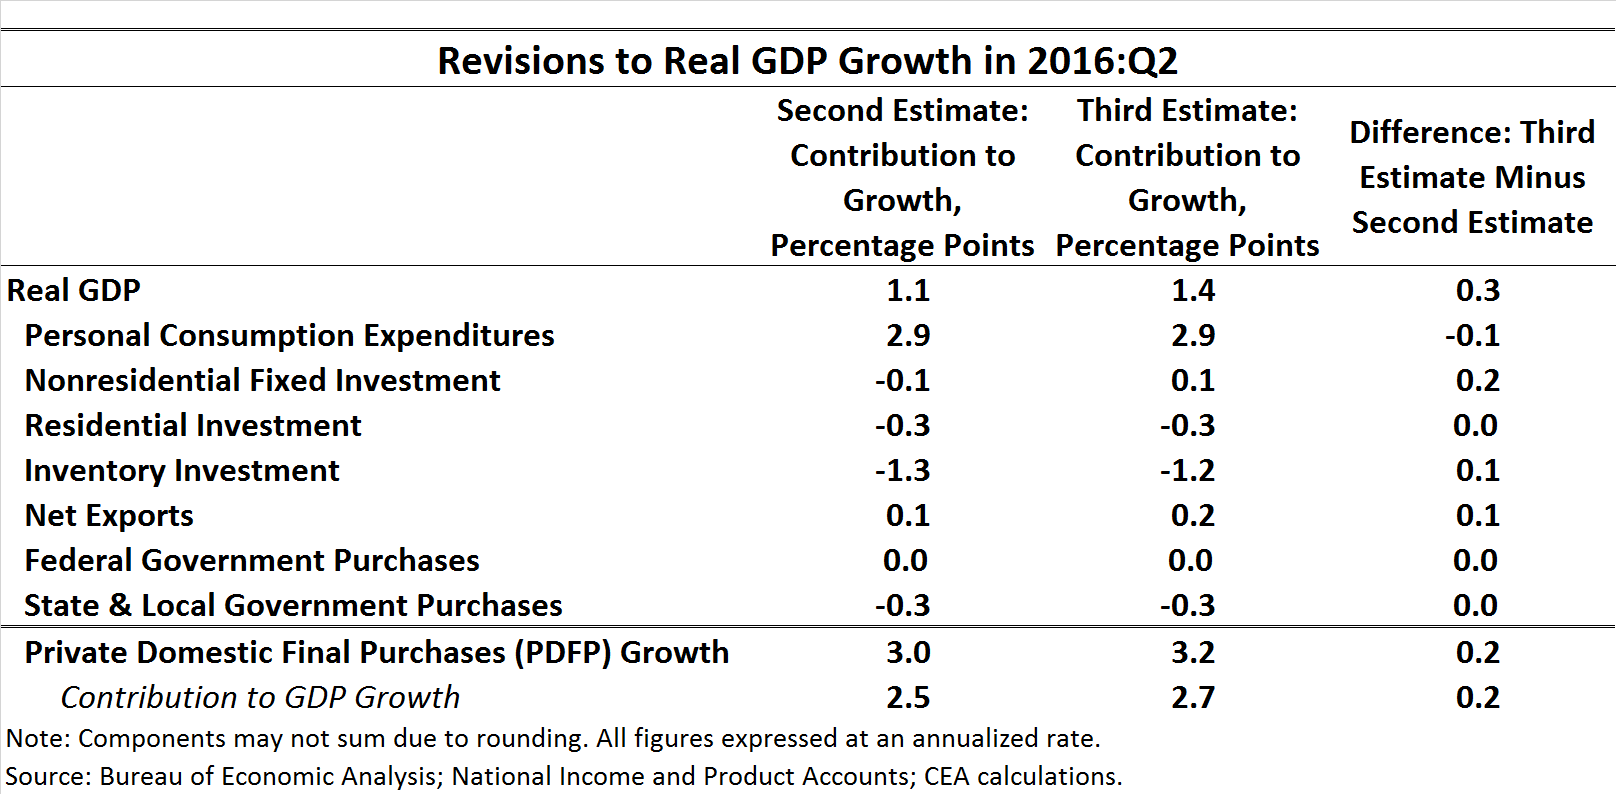 Revisions to Real GDP Growth in 2016:Q2